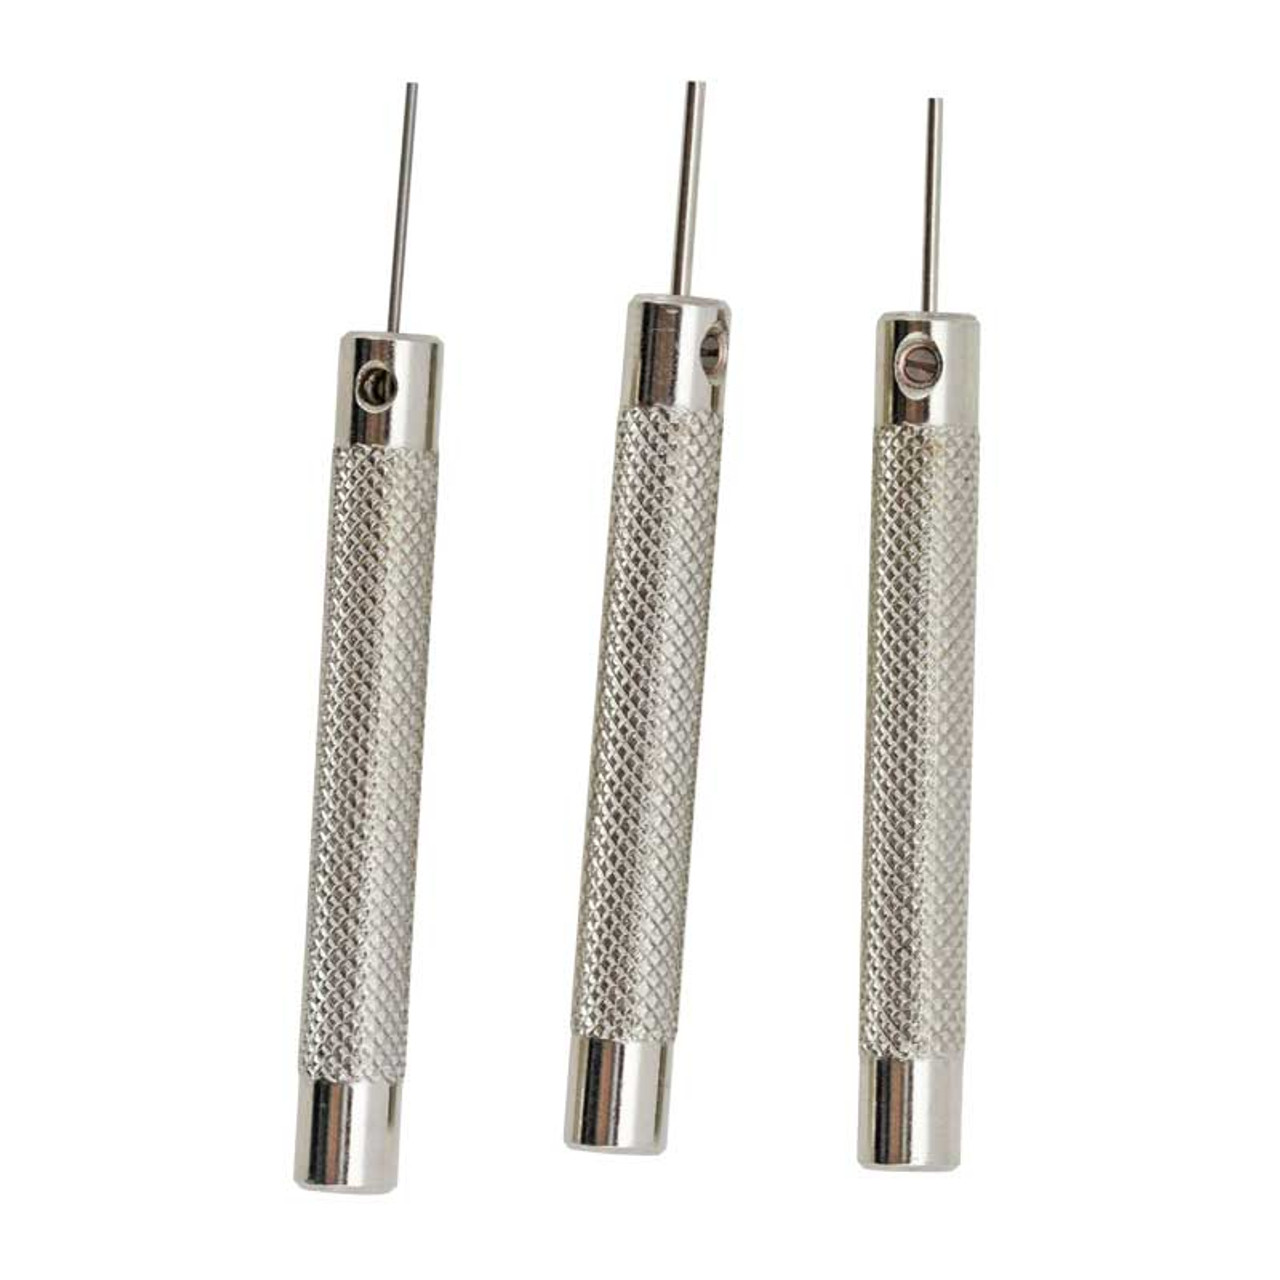 Set of Two Clips for Gluing Watch Straps | Esslinger